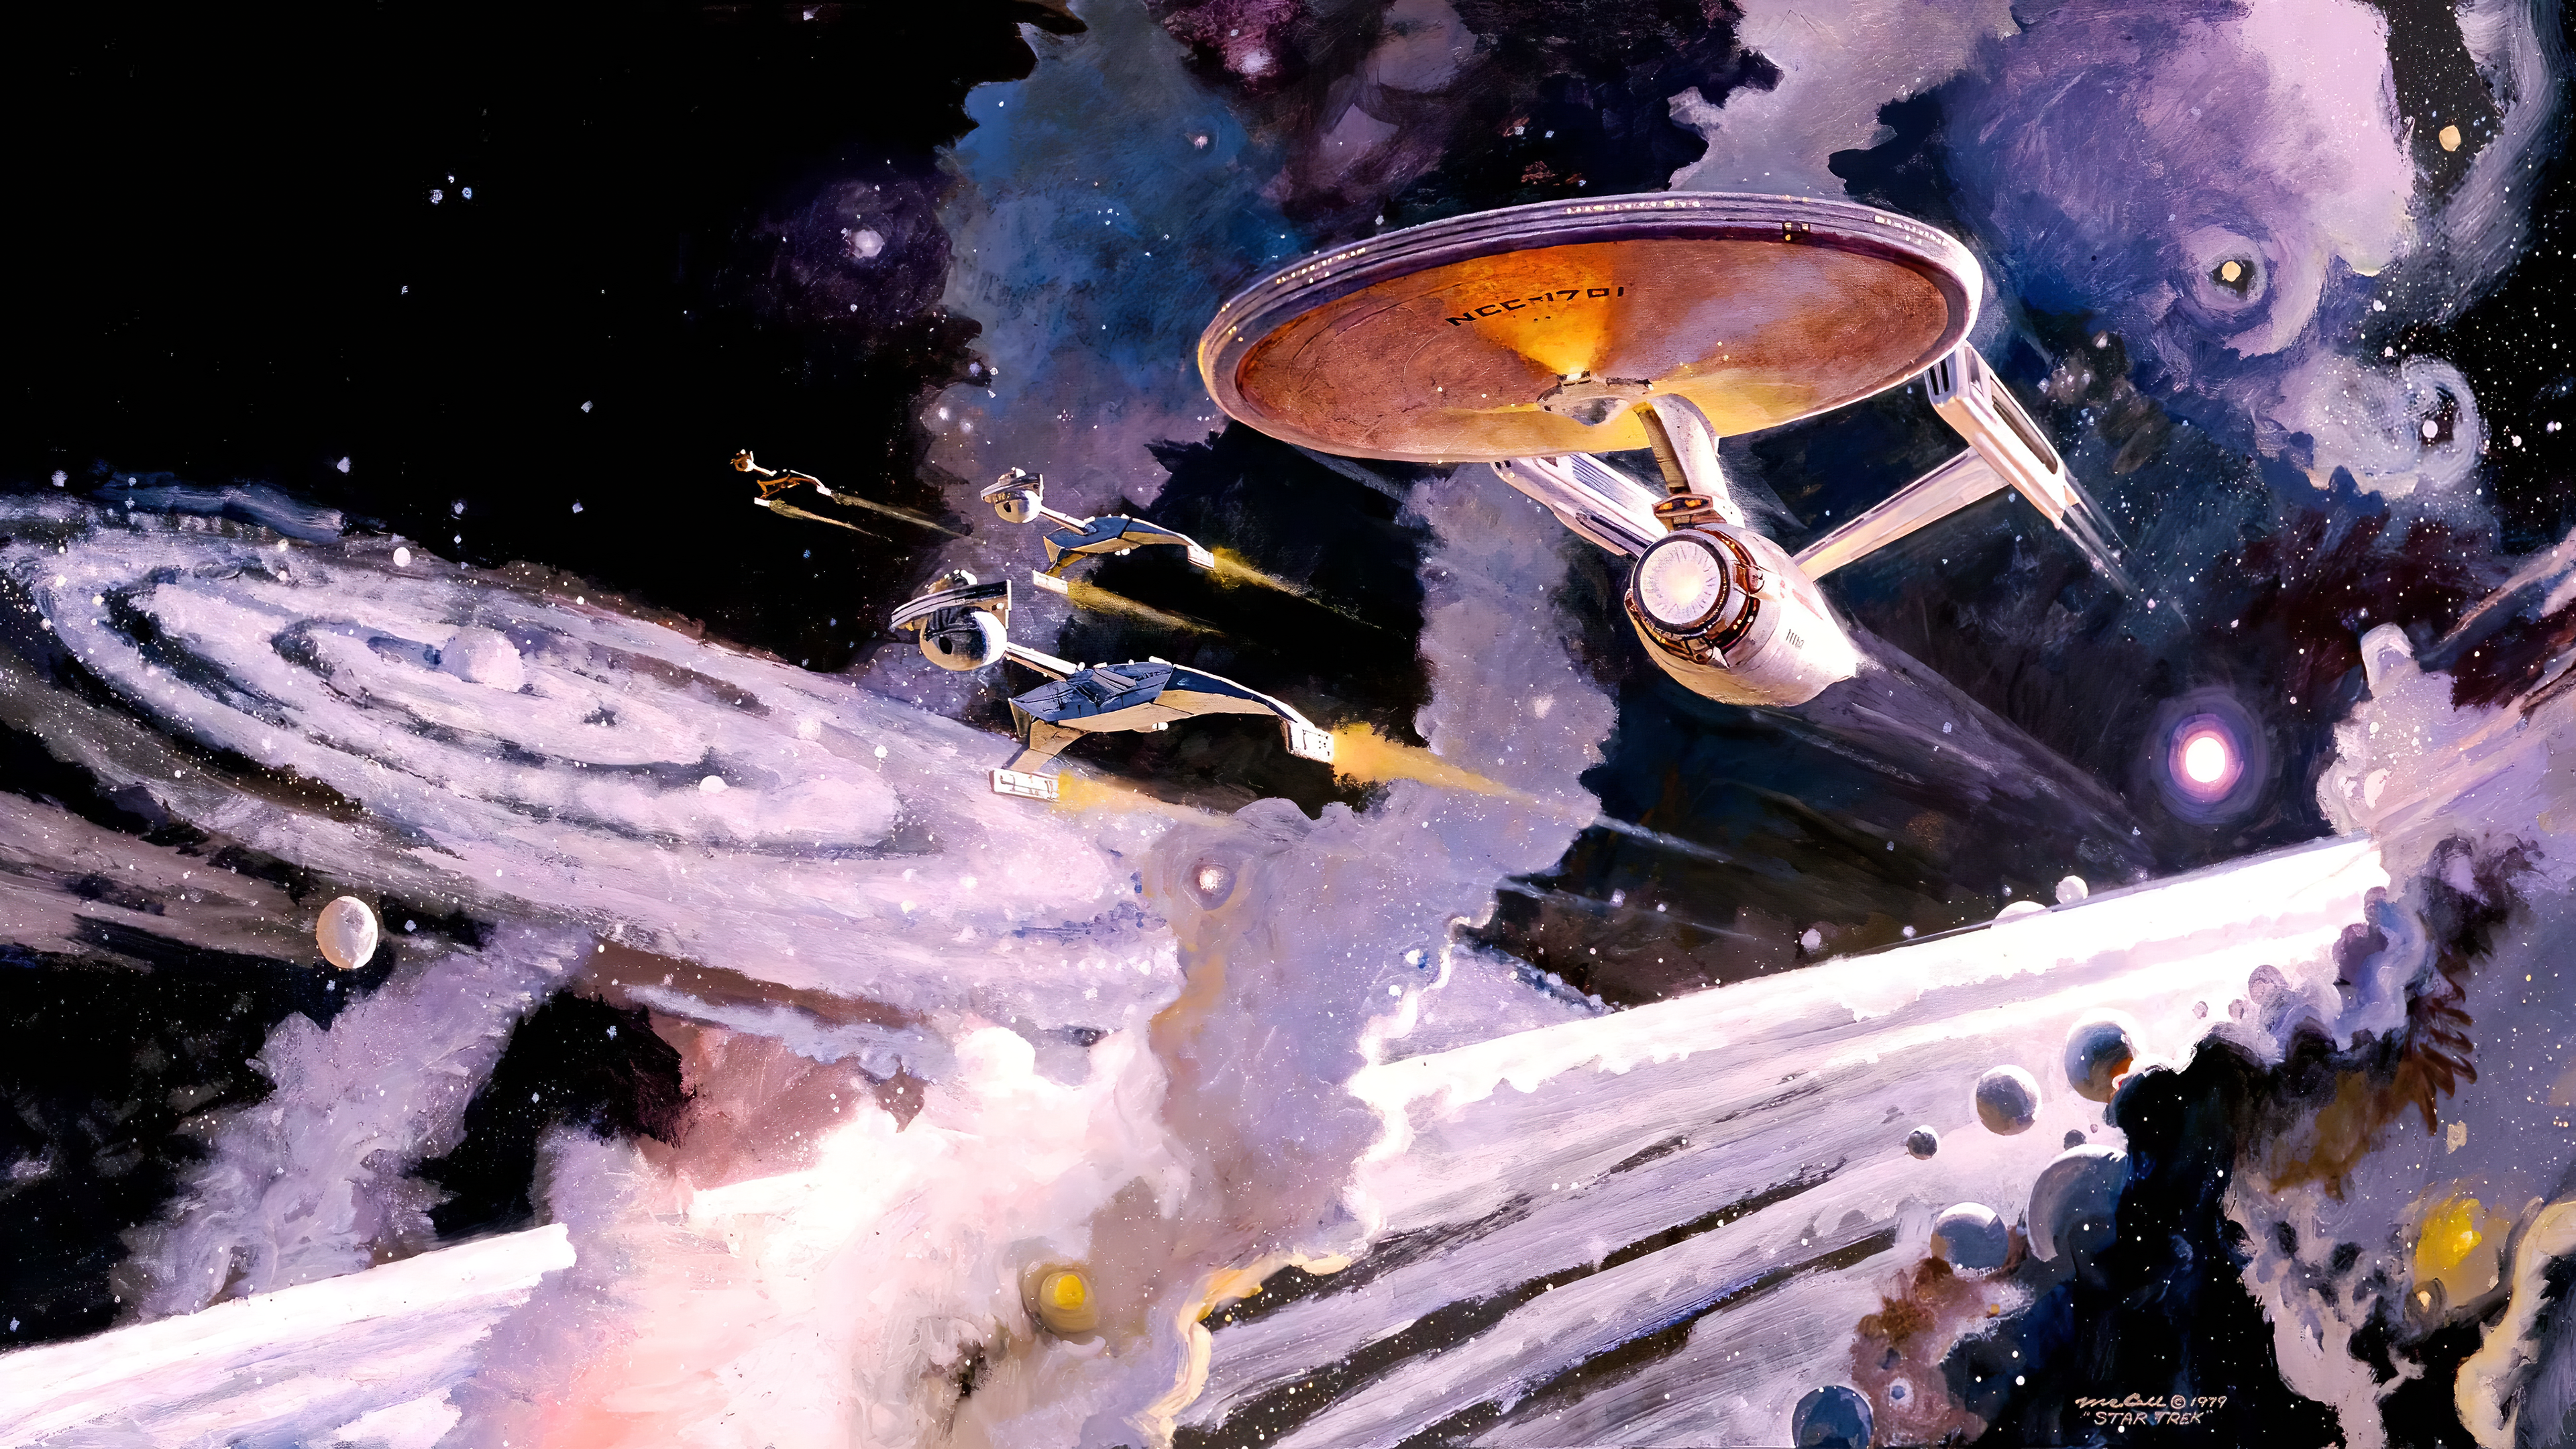 Enterprise Emergence by Robert McCall (Star Trek The Motion Picture) [3840x2160]